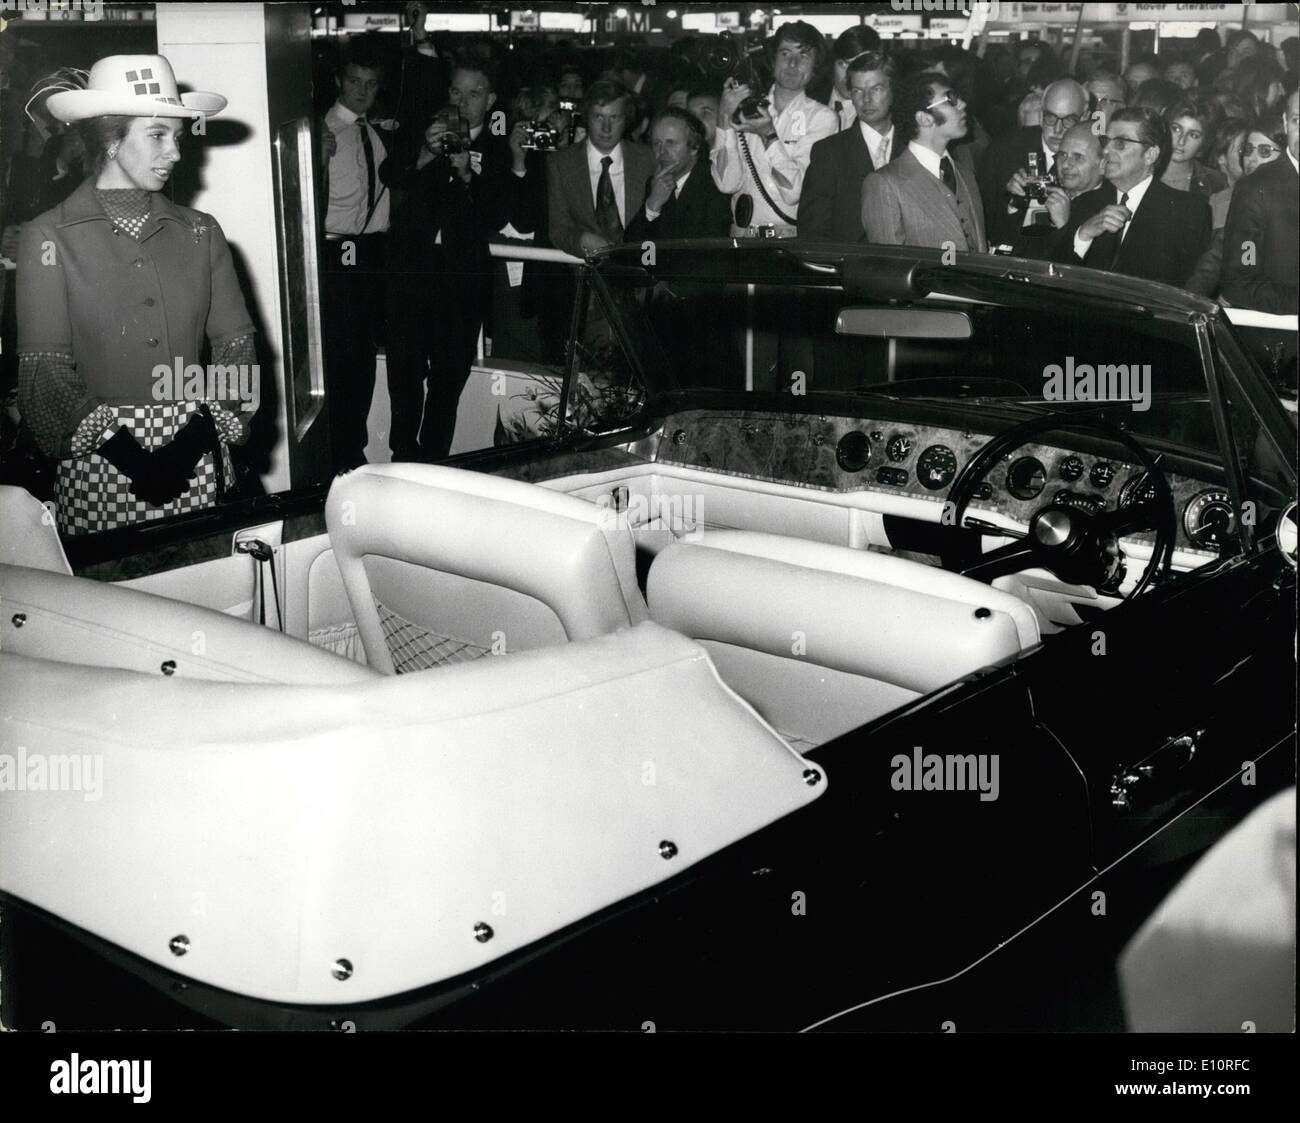 Oct. 10, 1973 - Princess Anne opens the Motor show. Princess Anne today opened the London International Motor show at Earls Court. Photo shows Princess Anne looks into an open top Rolls Royce , at the Motor Show. Stock Photo